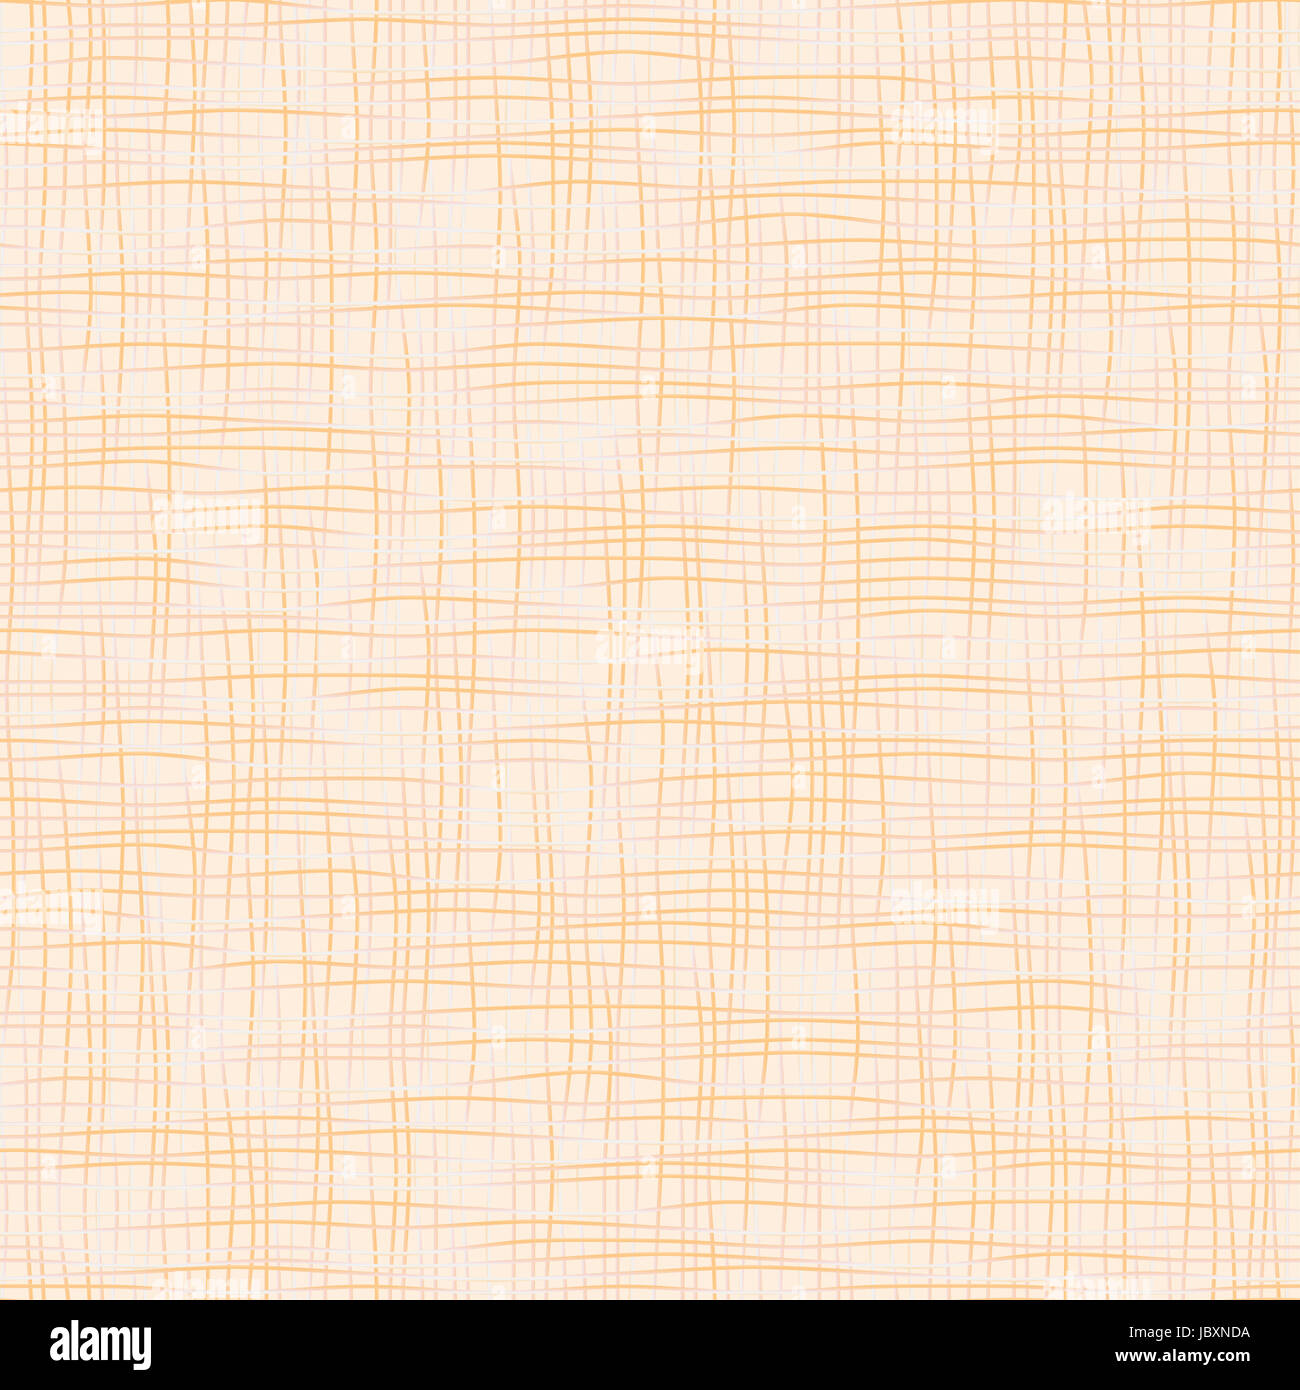 seamless orange colored abstract background vector illustration Stock Photo